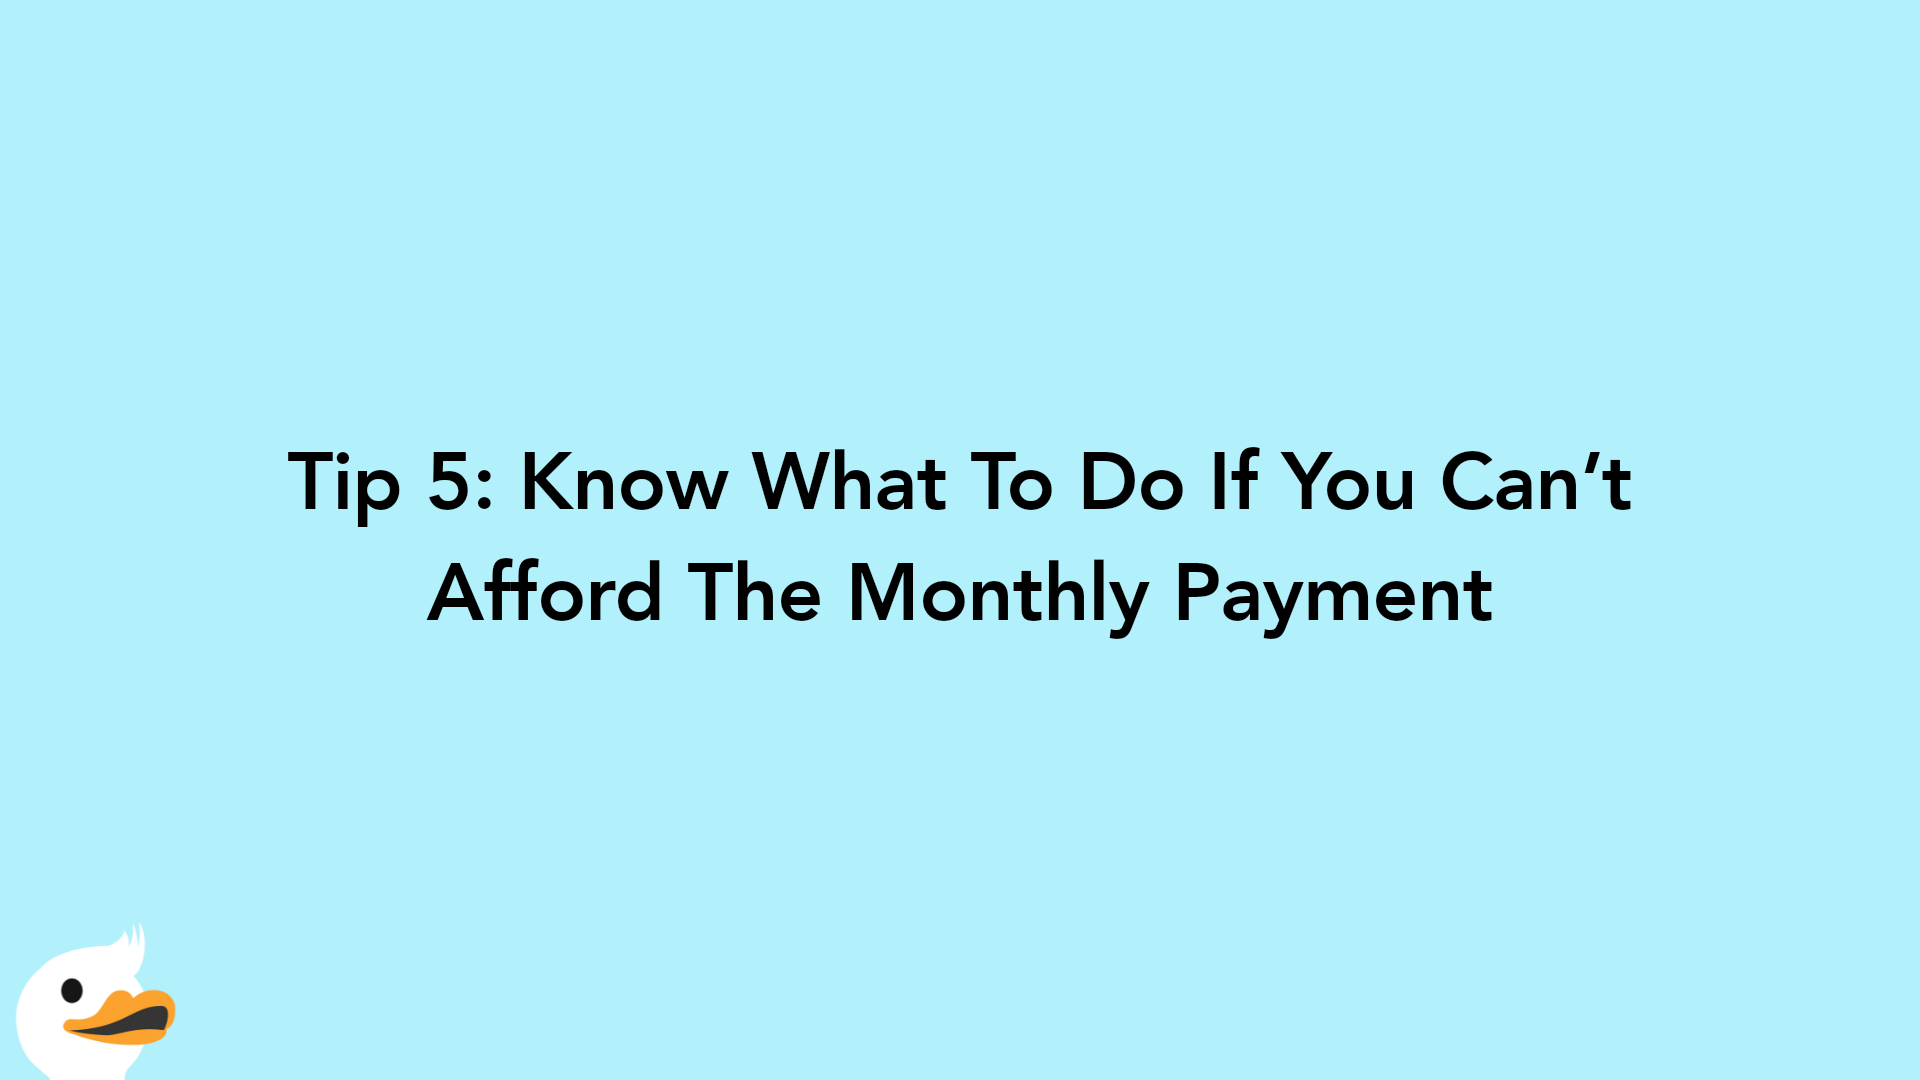 Tip 5: Know What To Do If You Can’t Afford The Monthly Payment